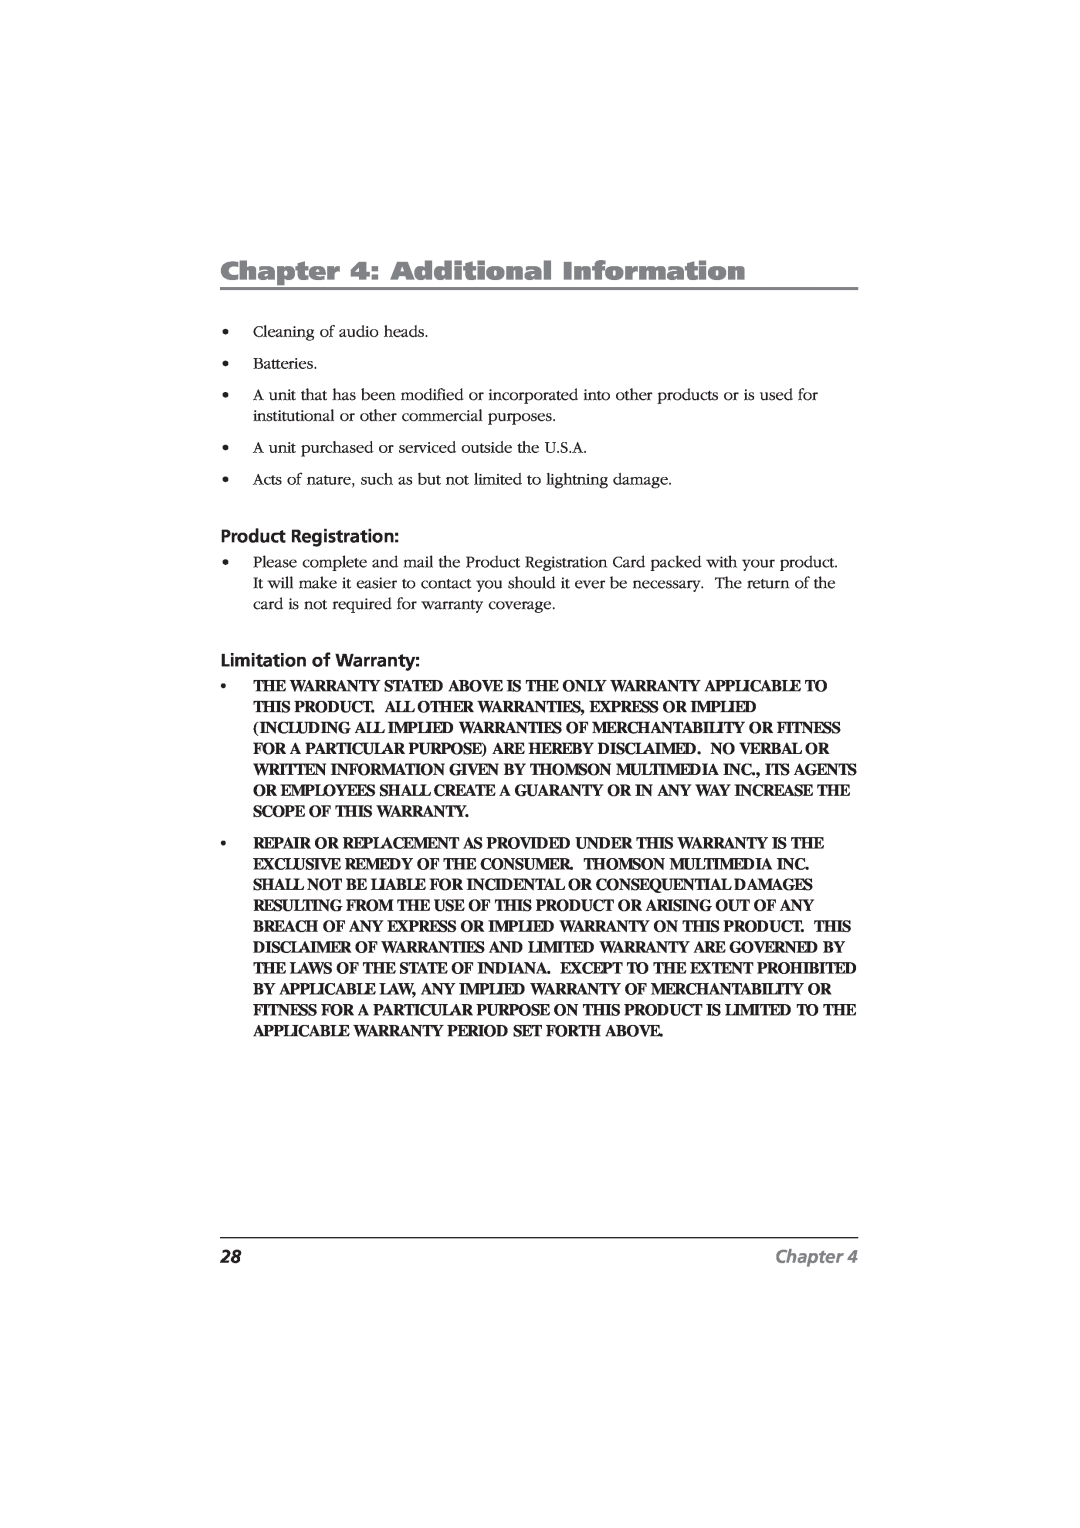 RCA CDRW10 manual Additional Information, Product Registration, Limitation of Warranty, Chapter 